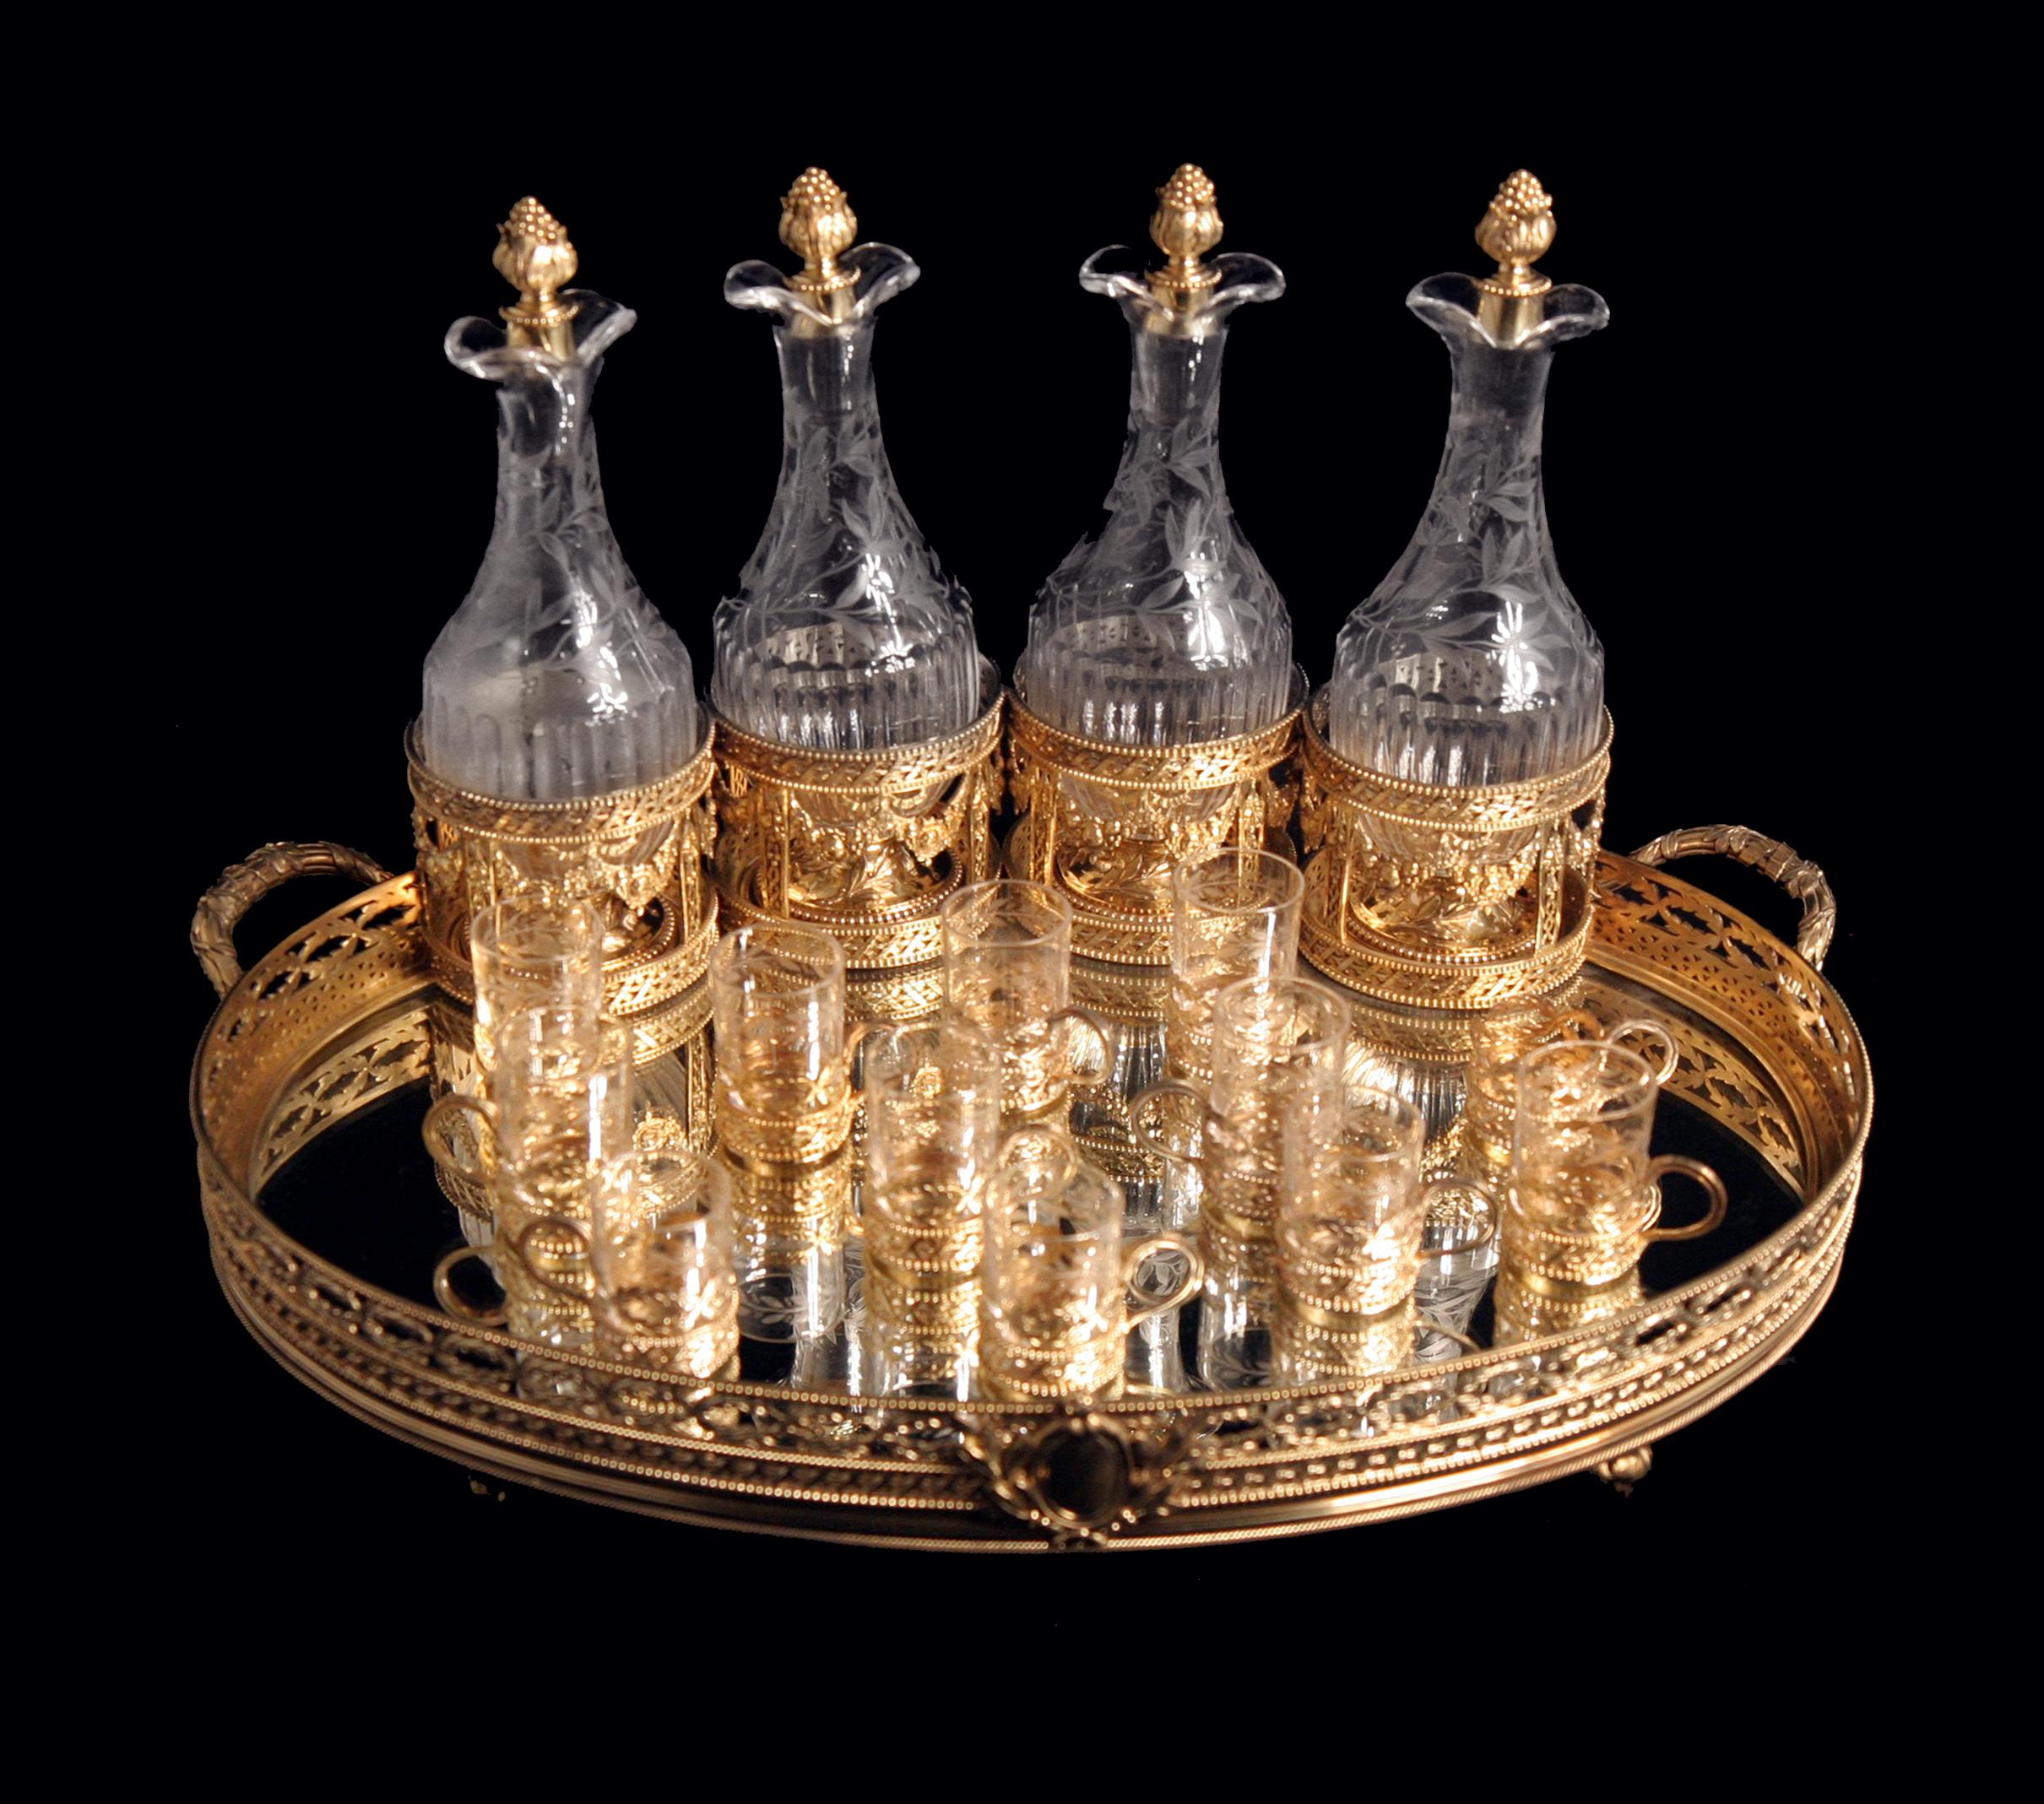 European Odiot - 17pc Napoleon III Gold Plated Sterling Silver (Vermeil) Decanter Set For Sale